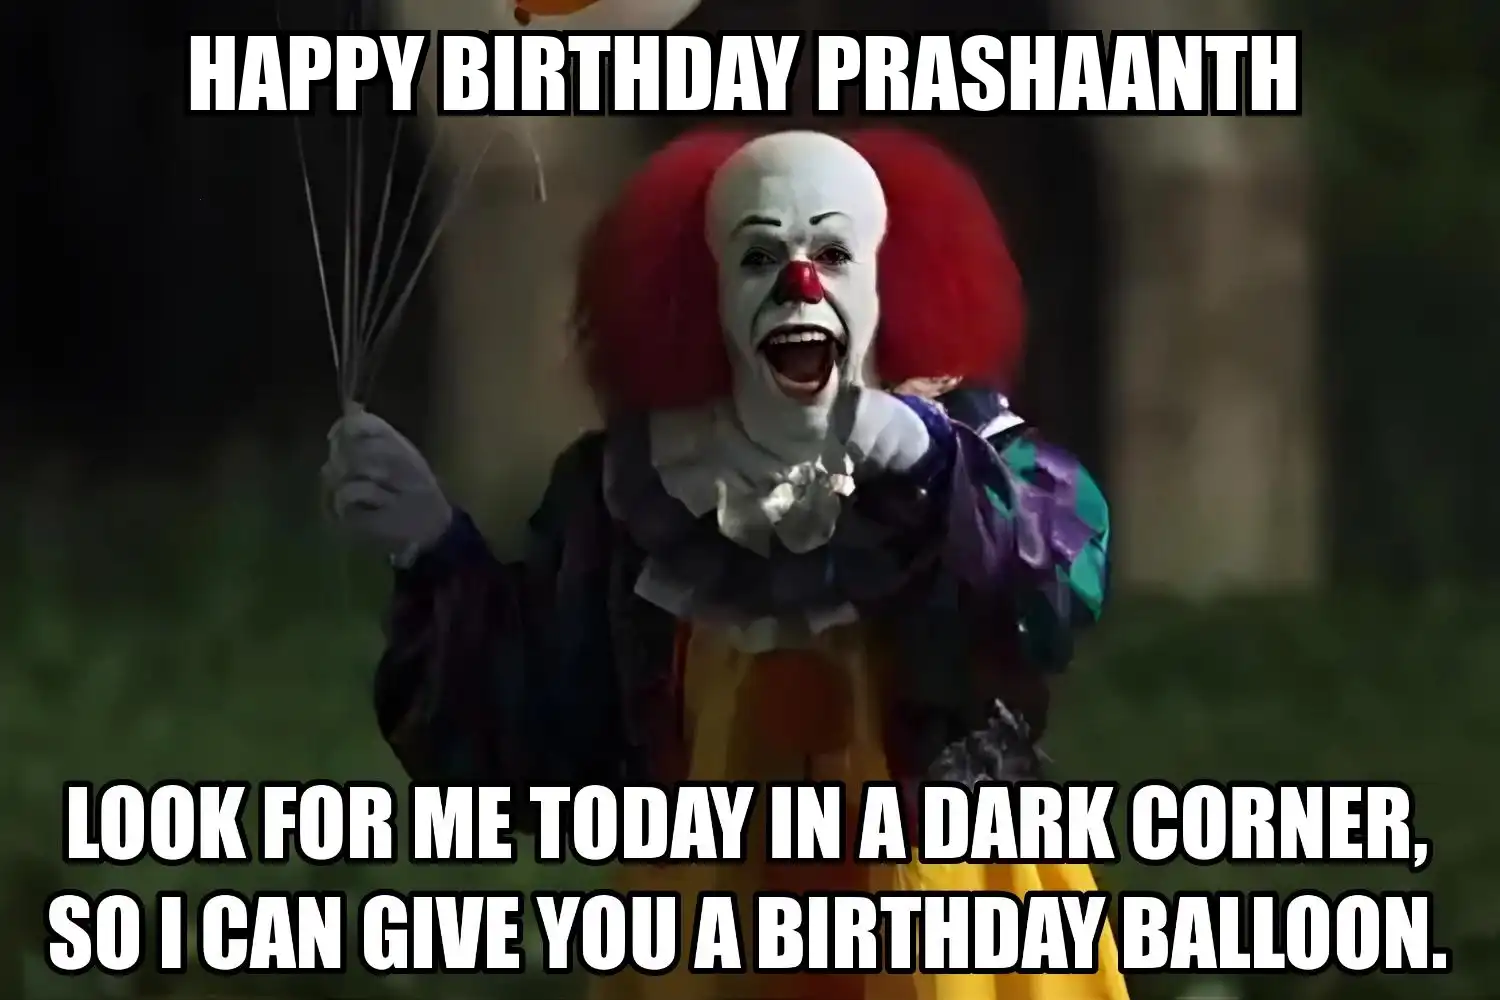 Happy Birthday Prashaanth I Can Give You A Balloon Meme